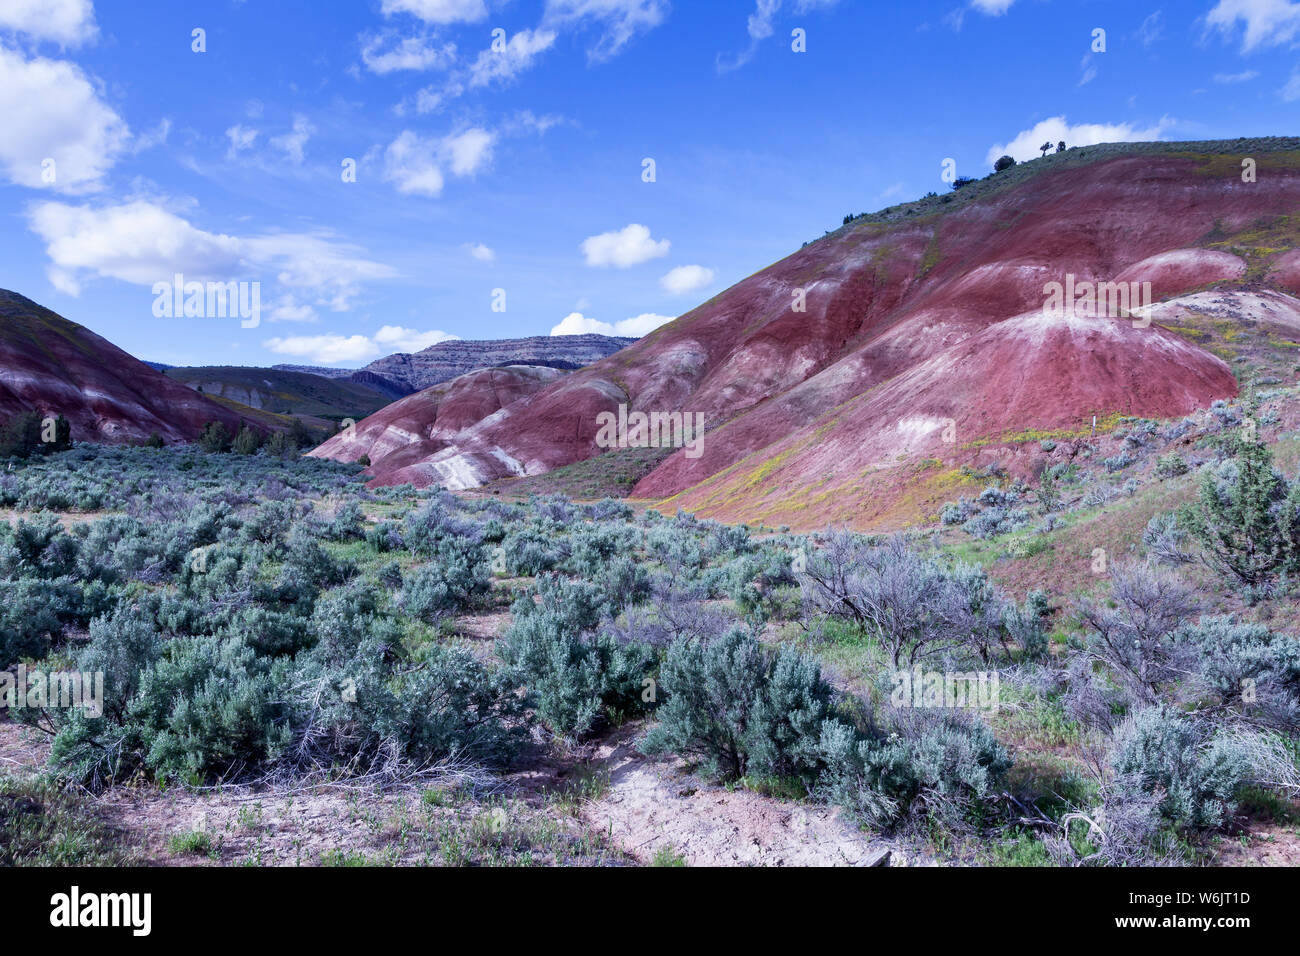 Oregon's Painted Hills is one of the three units of the John Day Fossil Beds National Monument, located in Wheeler County, Oregon. It totals 3,132 acr Stock Photo